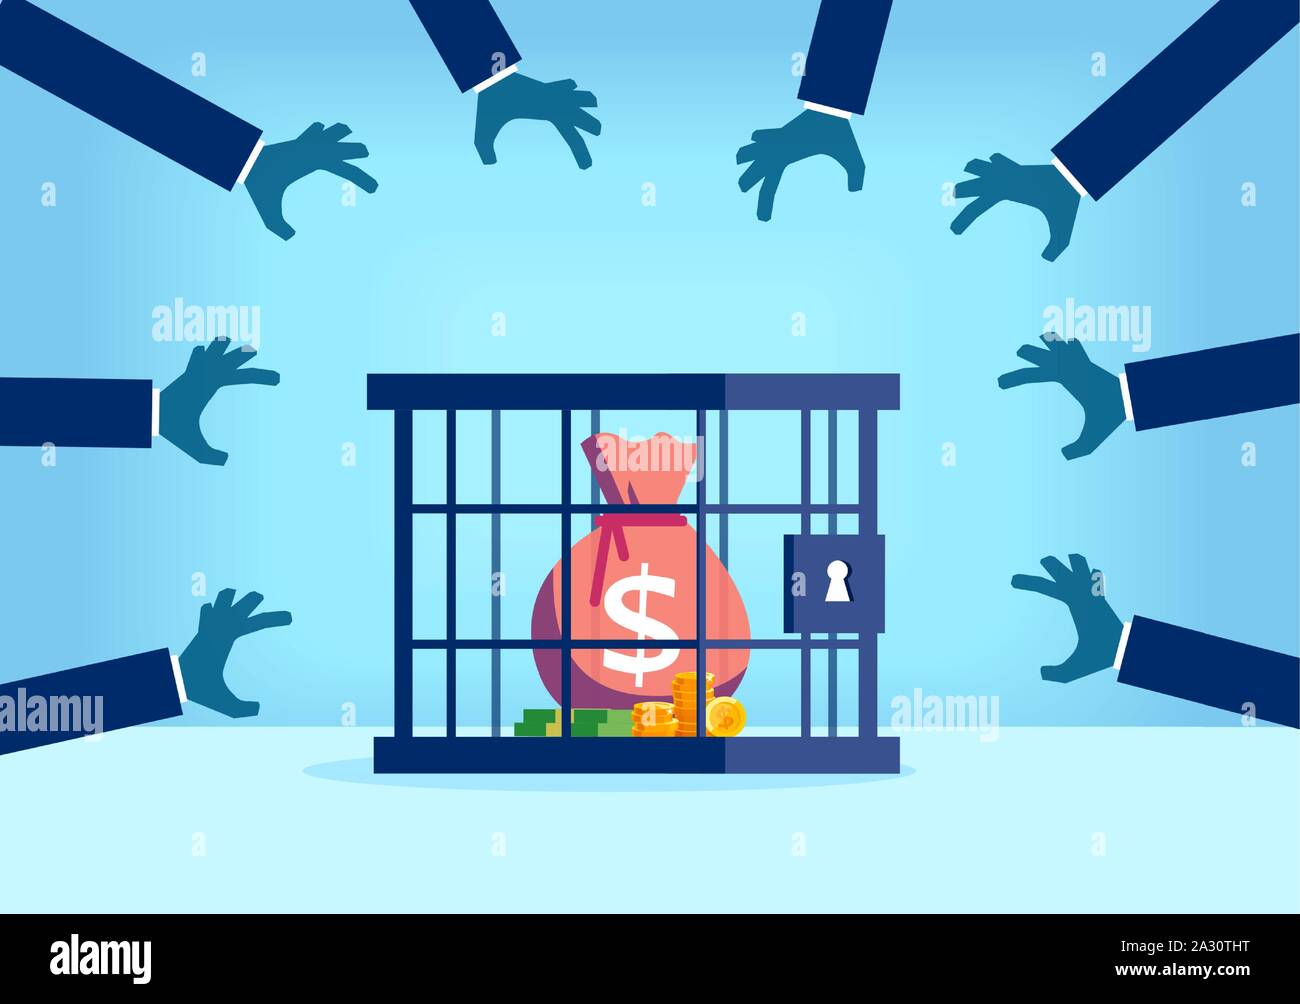 Vector of a sack of money with dollar sign desired by many people being trapped inside a locked cage Stock Vector